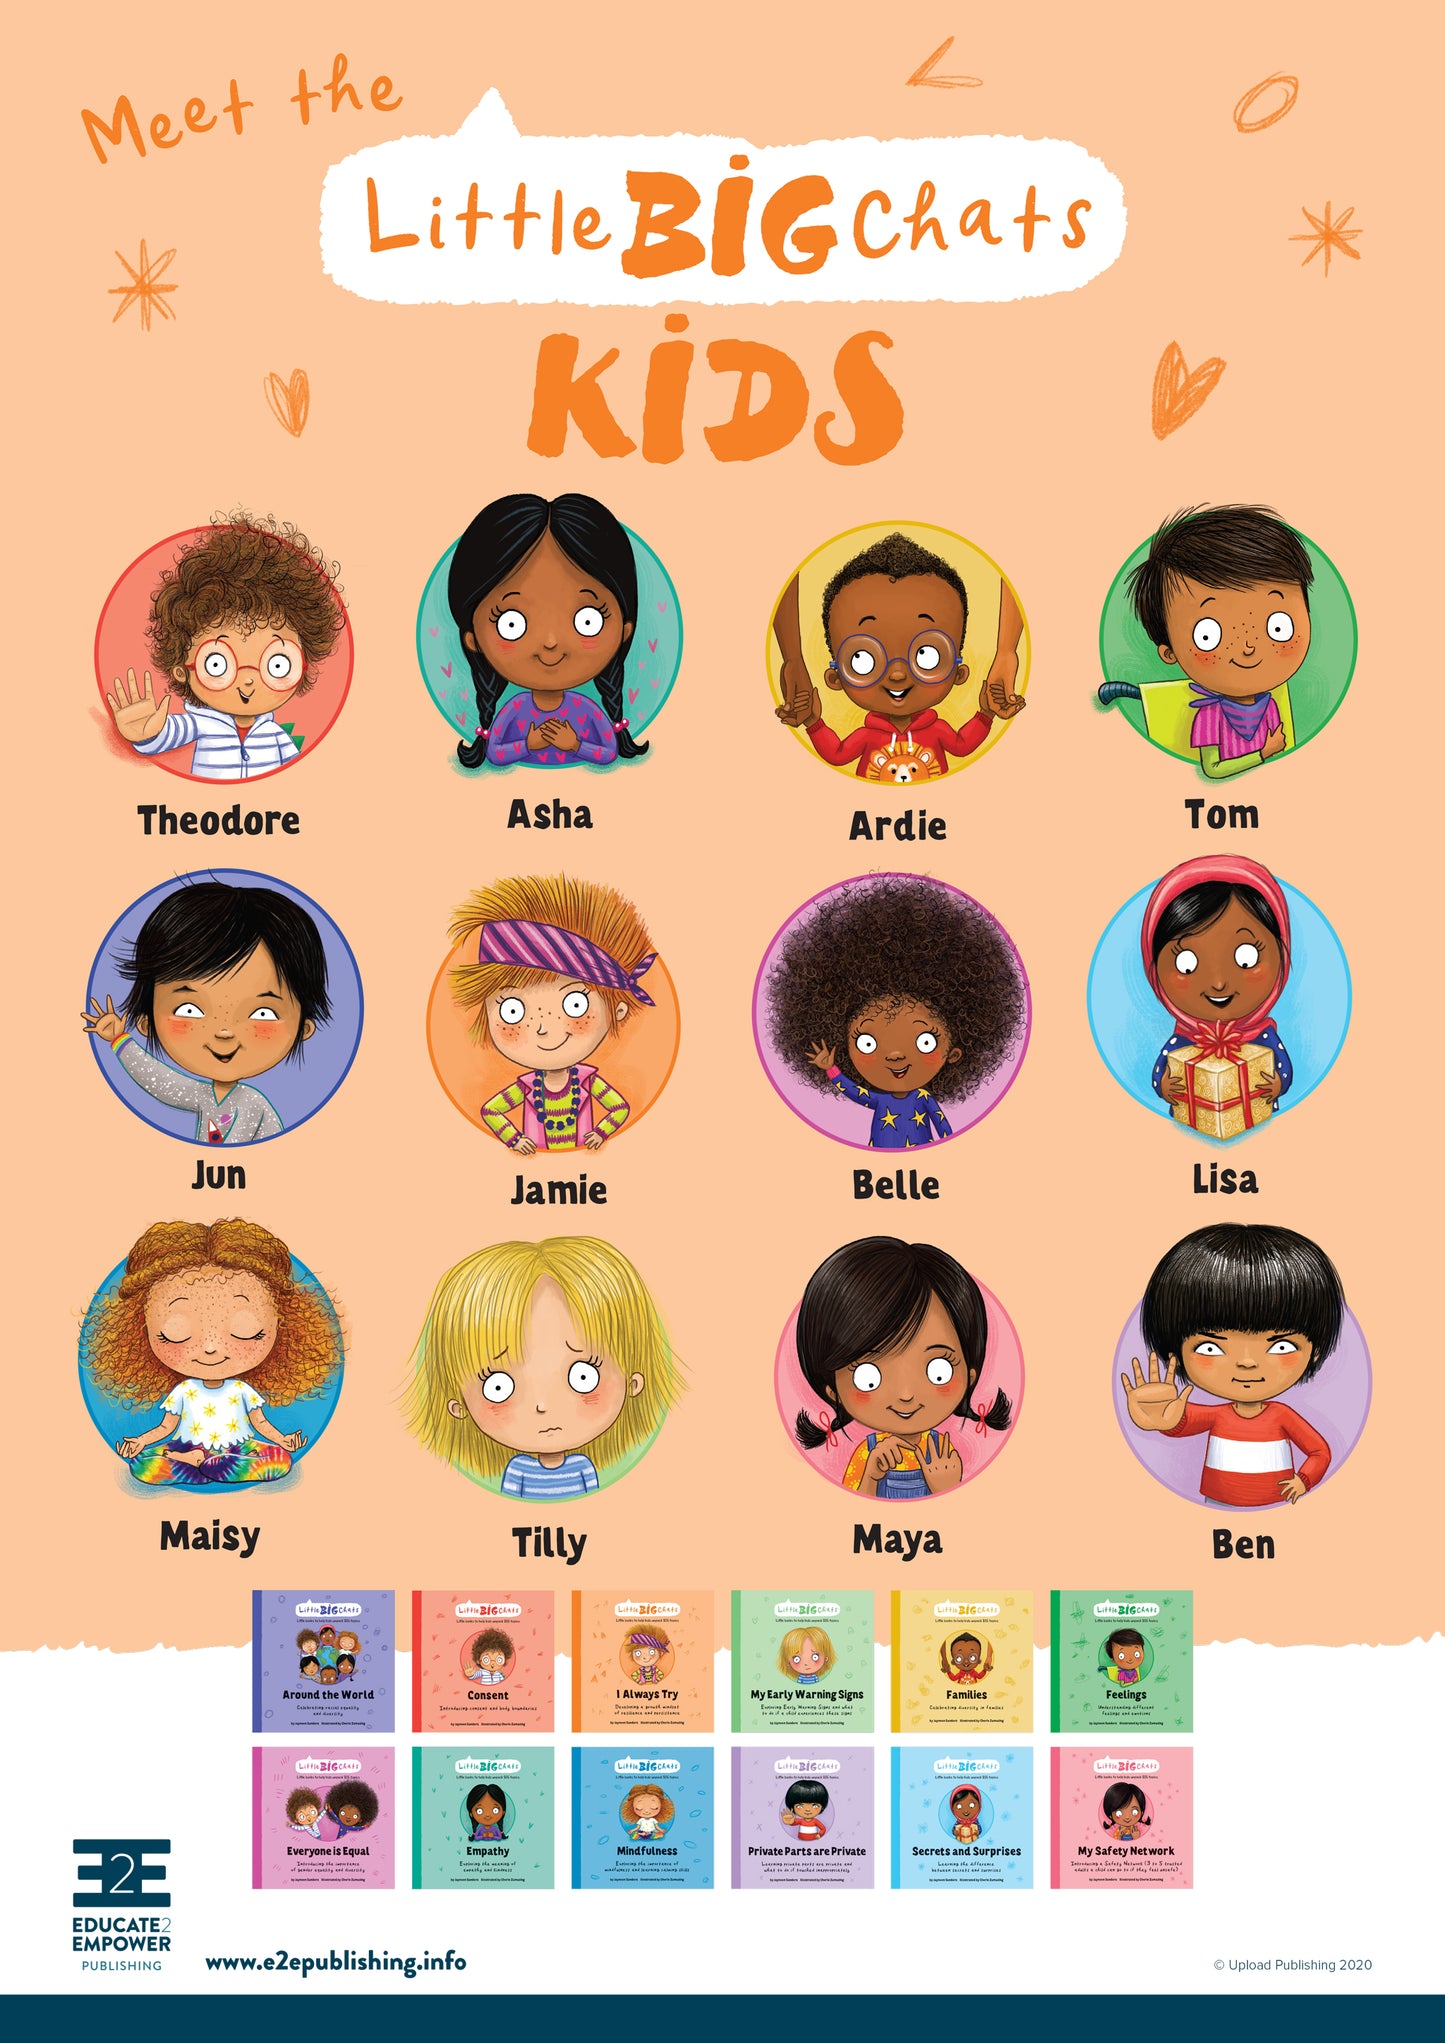 A poster titled 'Meet the Little BIG Chats Kids'. It contains images of the characters from the 'Little BIG Chats' book series.